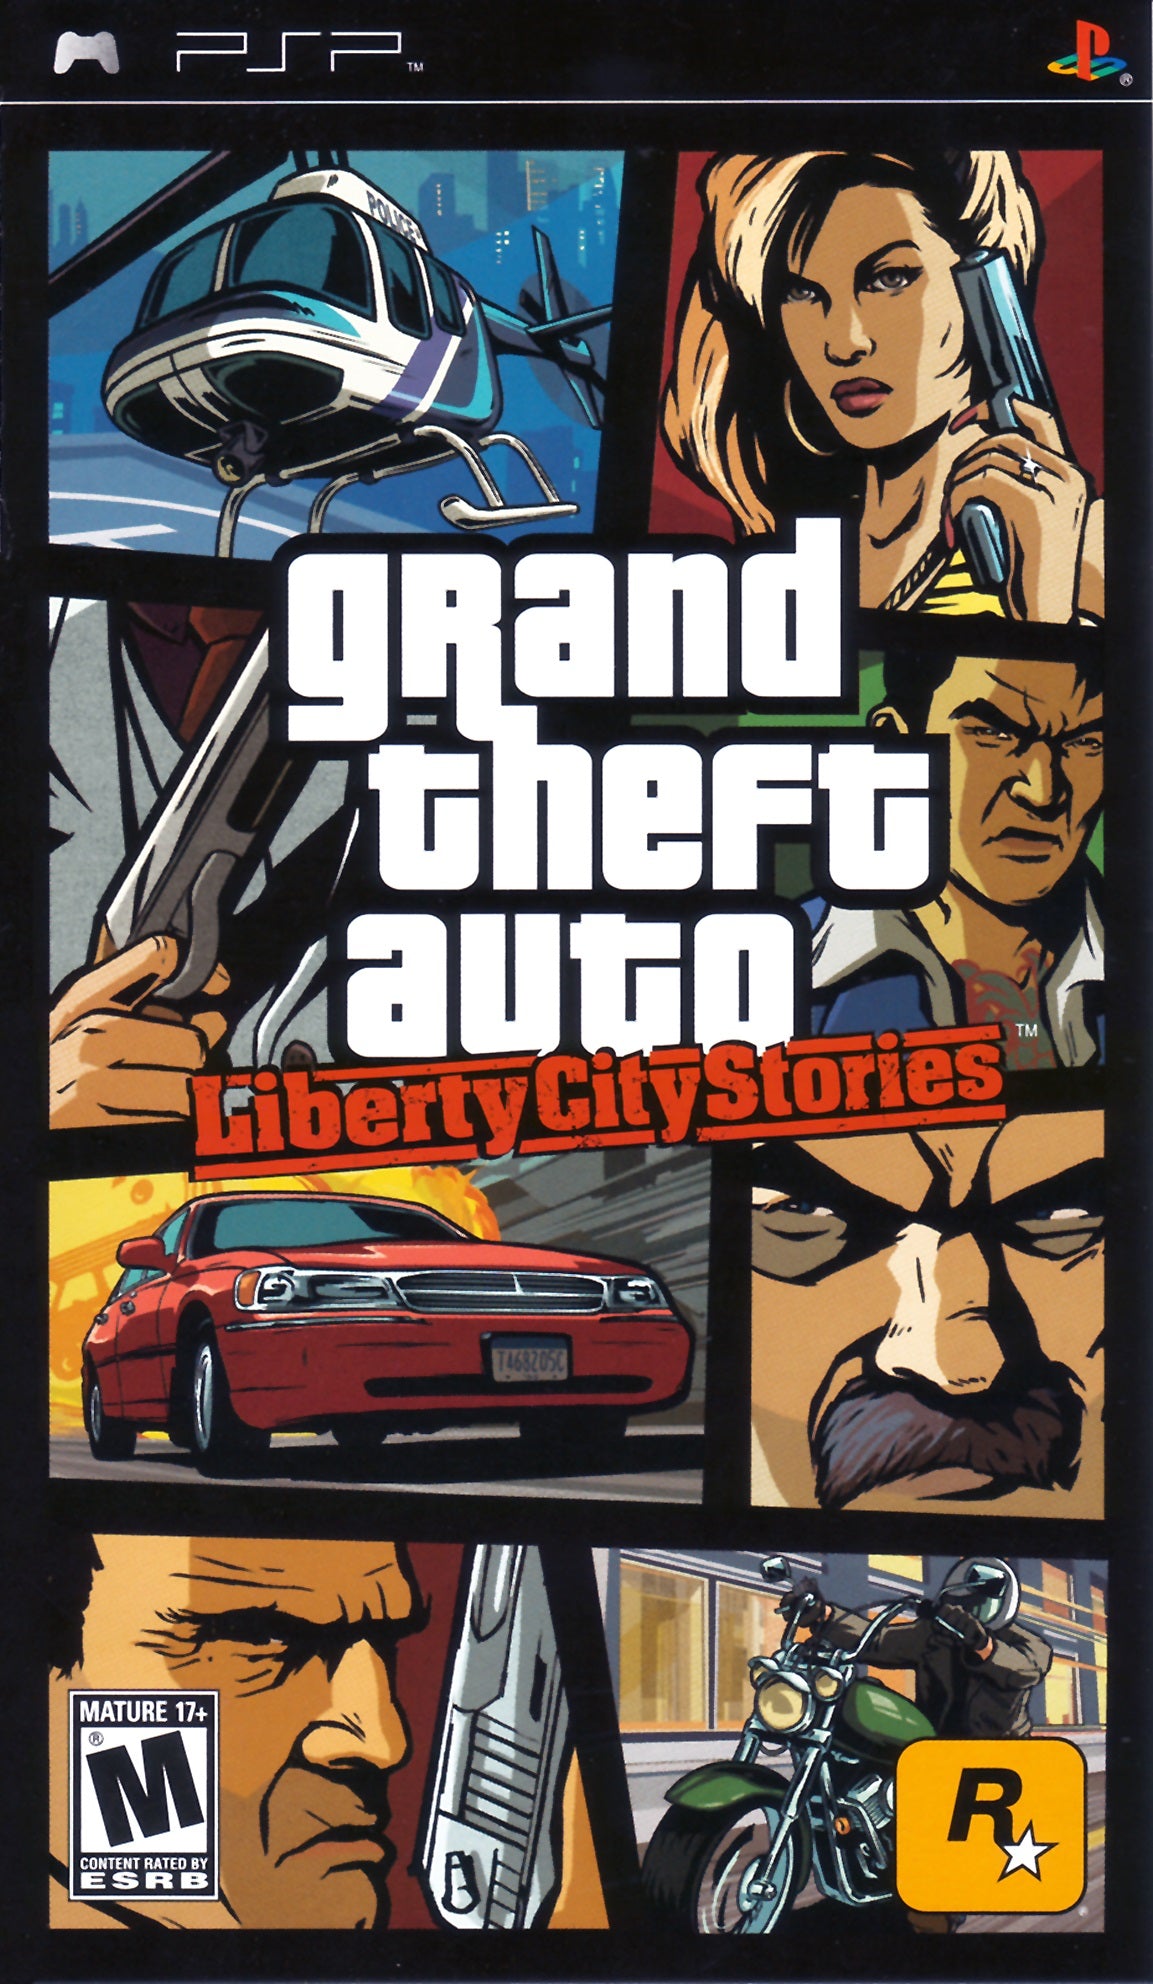 Game | Sony PSP | Grand Theft Auto Liberty City Stories